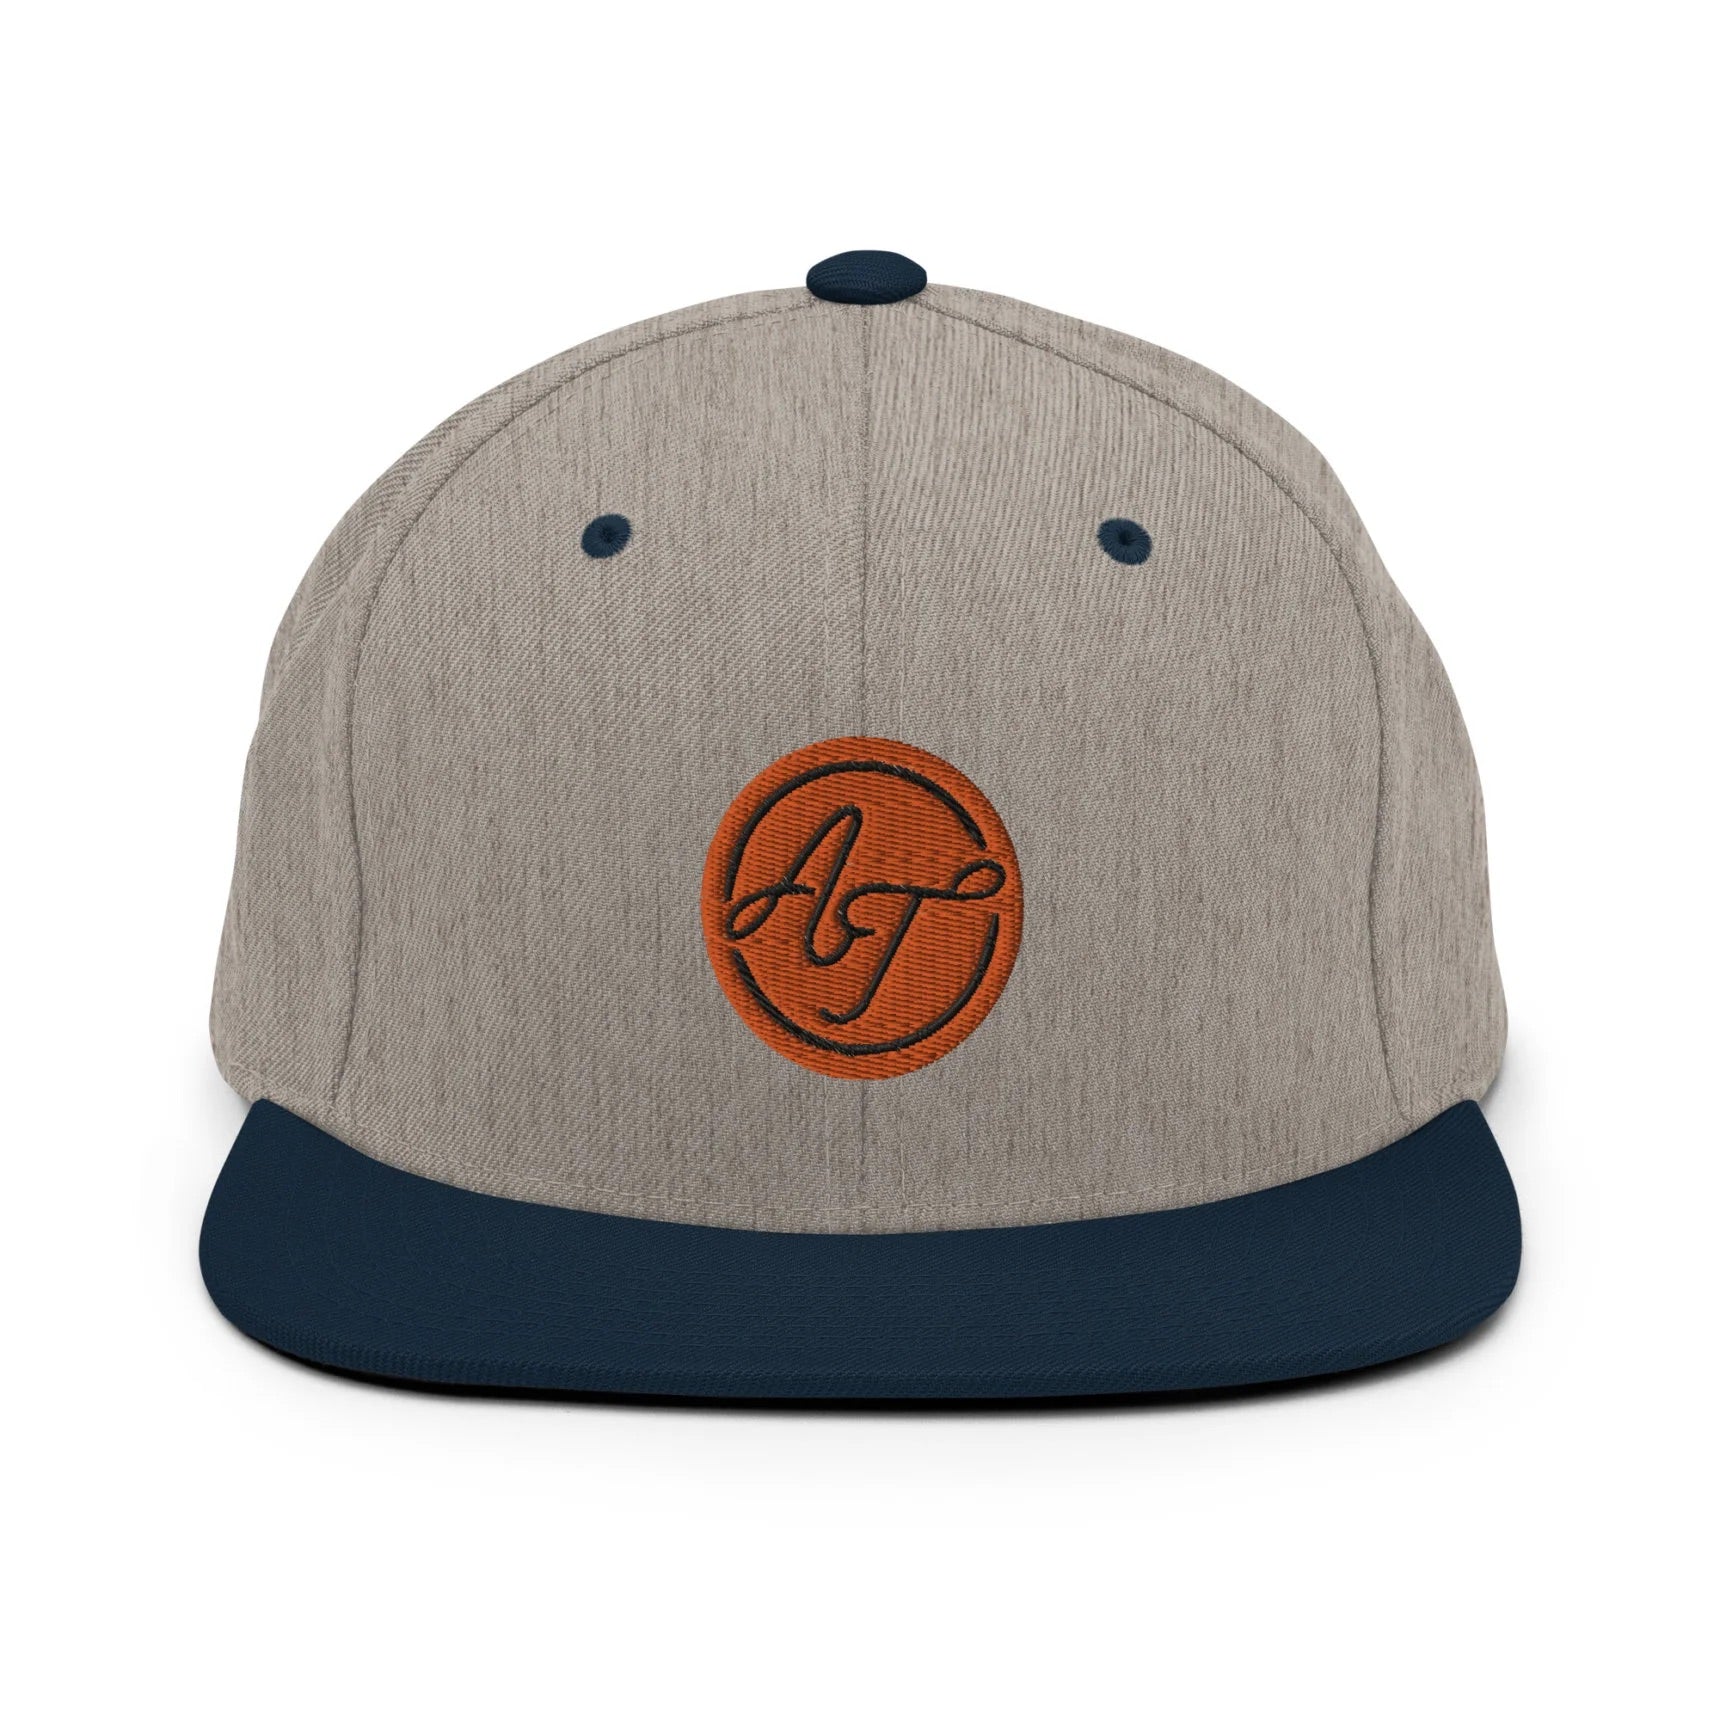 Thuuuuney ShowZone snapback hat in heather grey with navy brim and accents